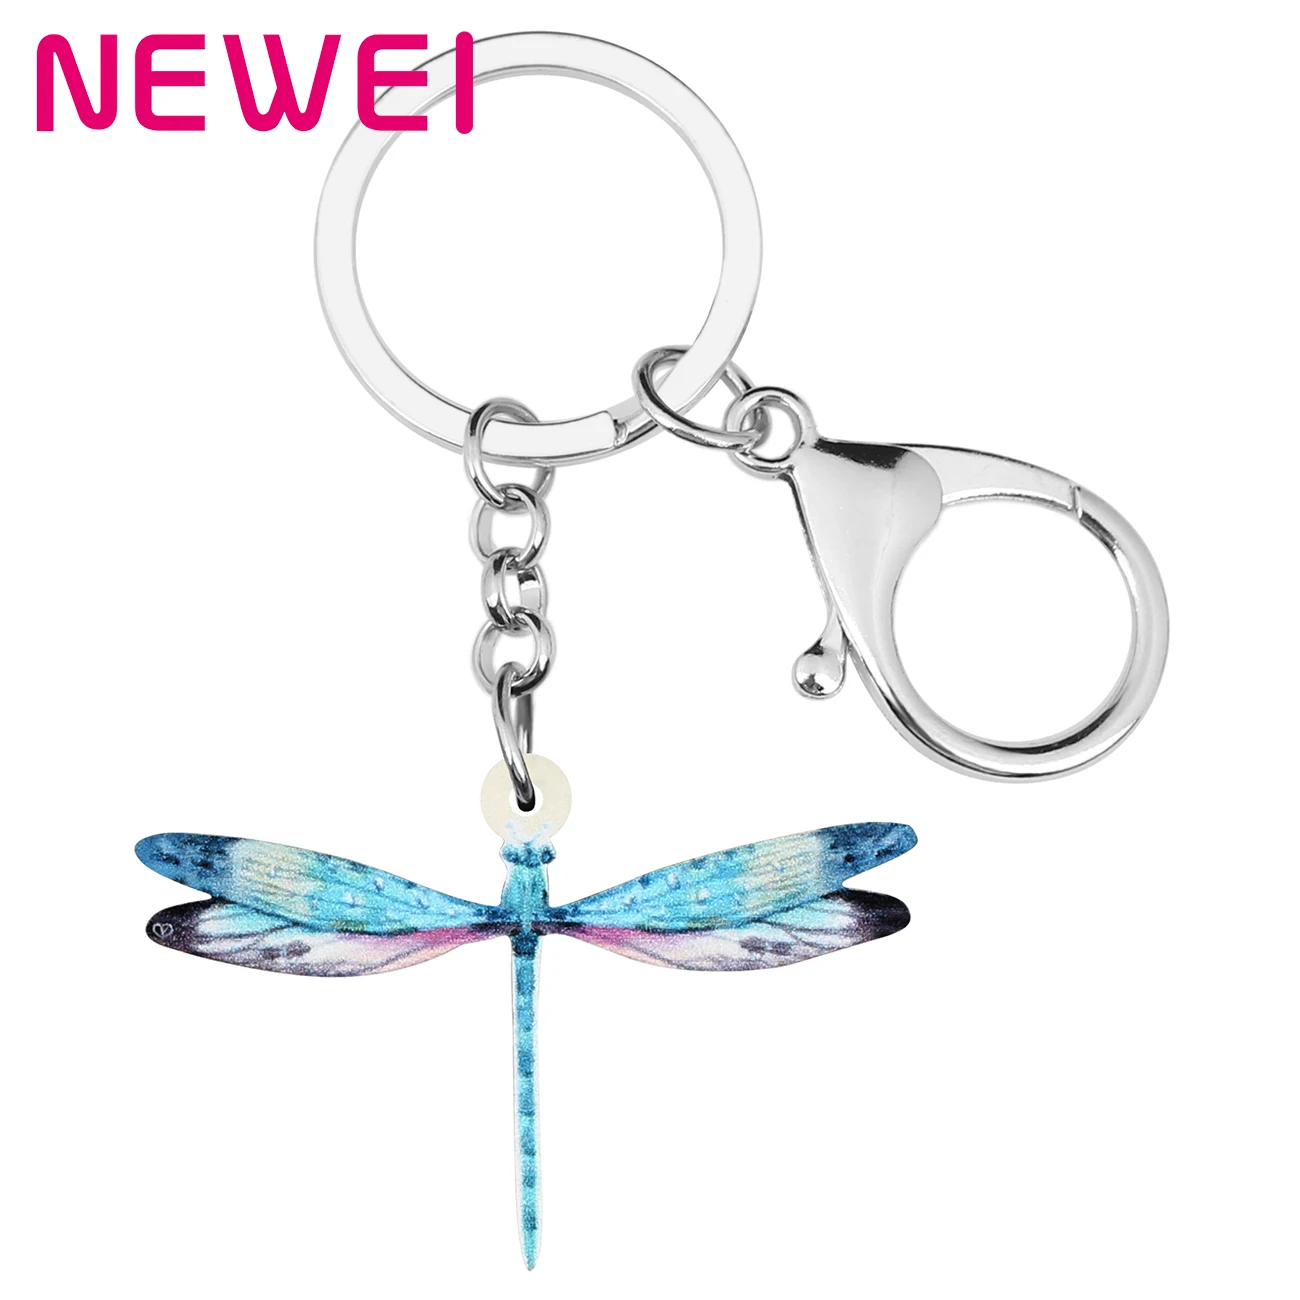 

Newei Acrylic Blue Dragonfly Keychains Print Lovely Insect Animal Keyring Jewelry For Women Kids Lover Gift Handbag Accessories